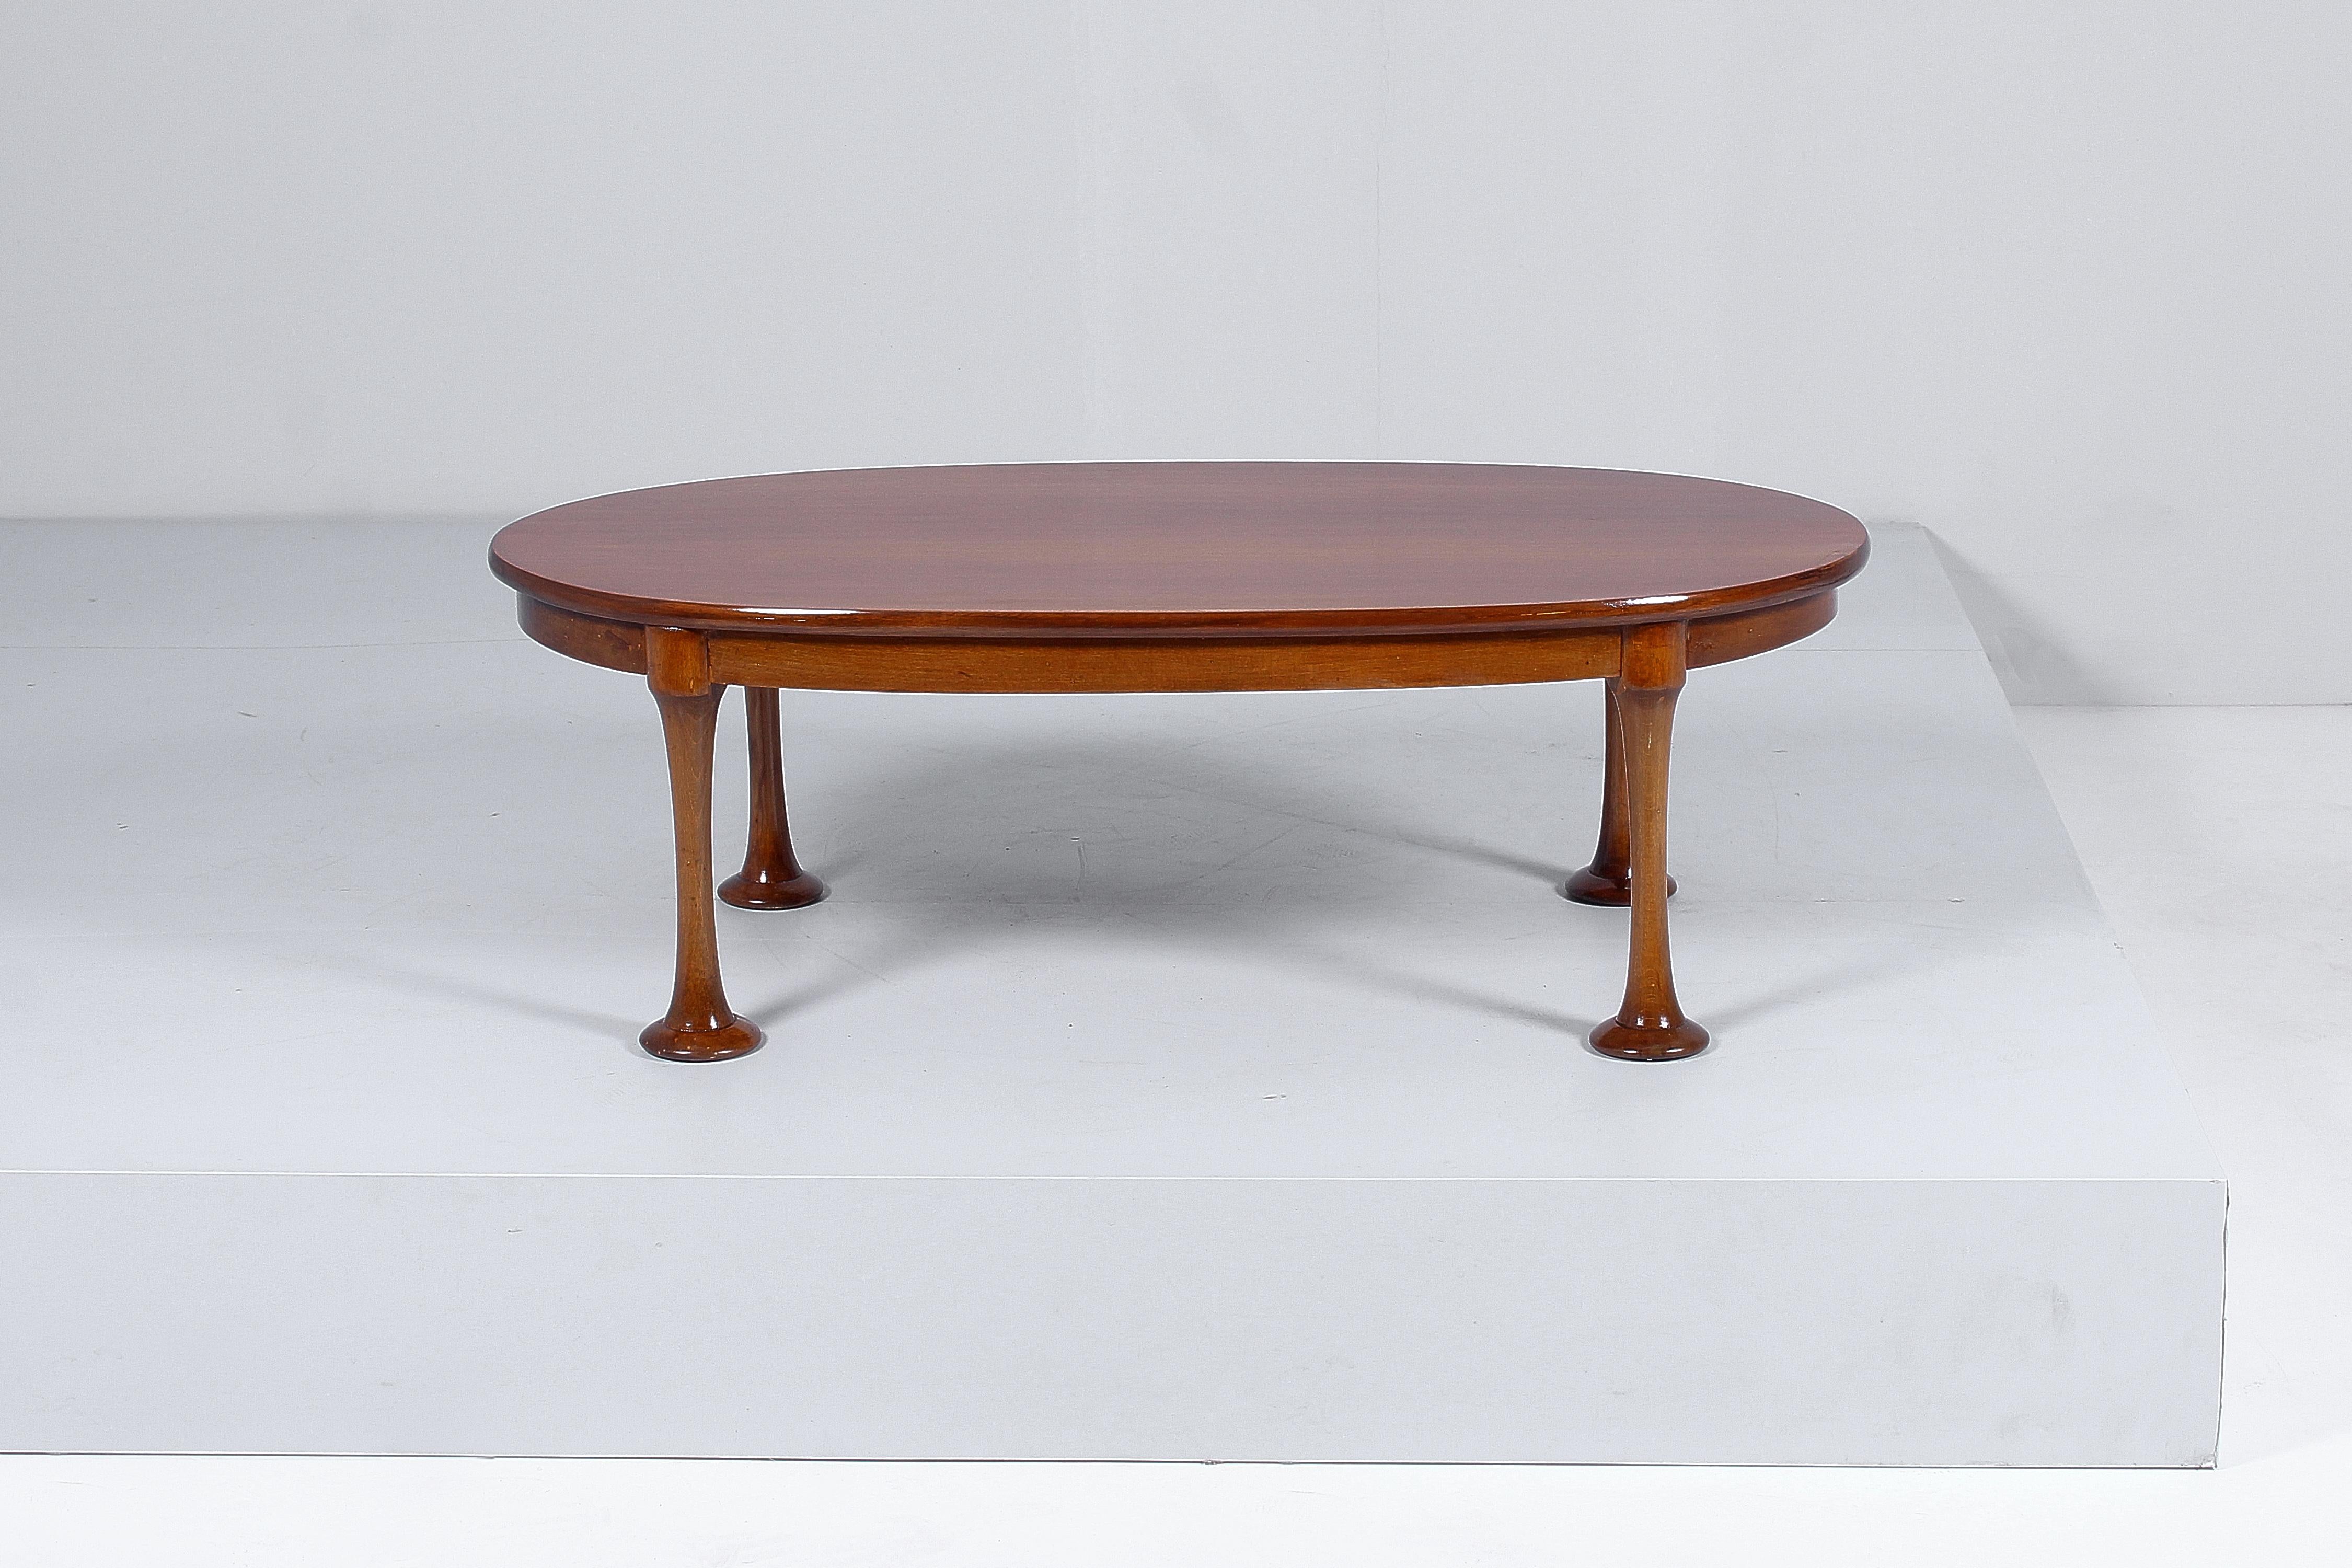 Particular and original restored oval coffee table with four cylindrical legs with flared feet. In the style of Angelo Mangiarotti, Italian production from the 60s.